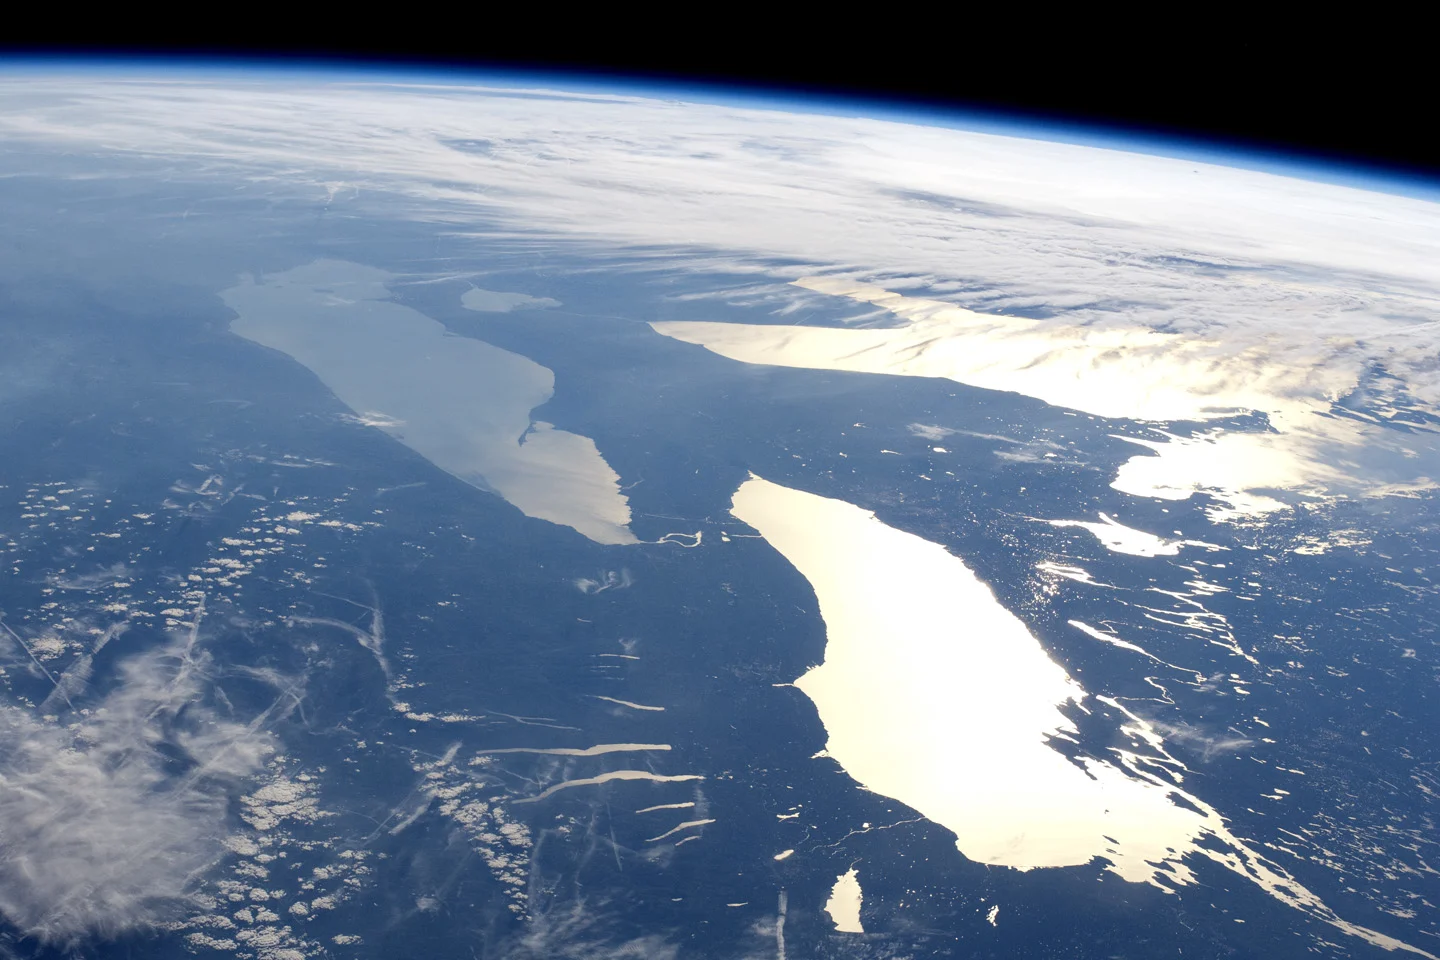 Lake Ontario and Lake Erie from the ISS - ISS031-E-123071 NASA